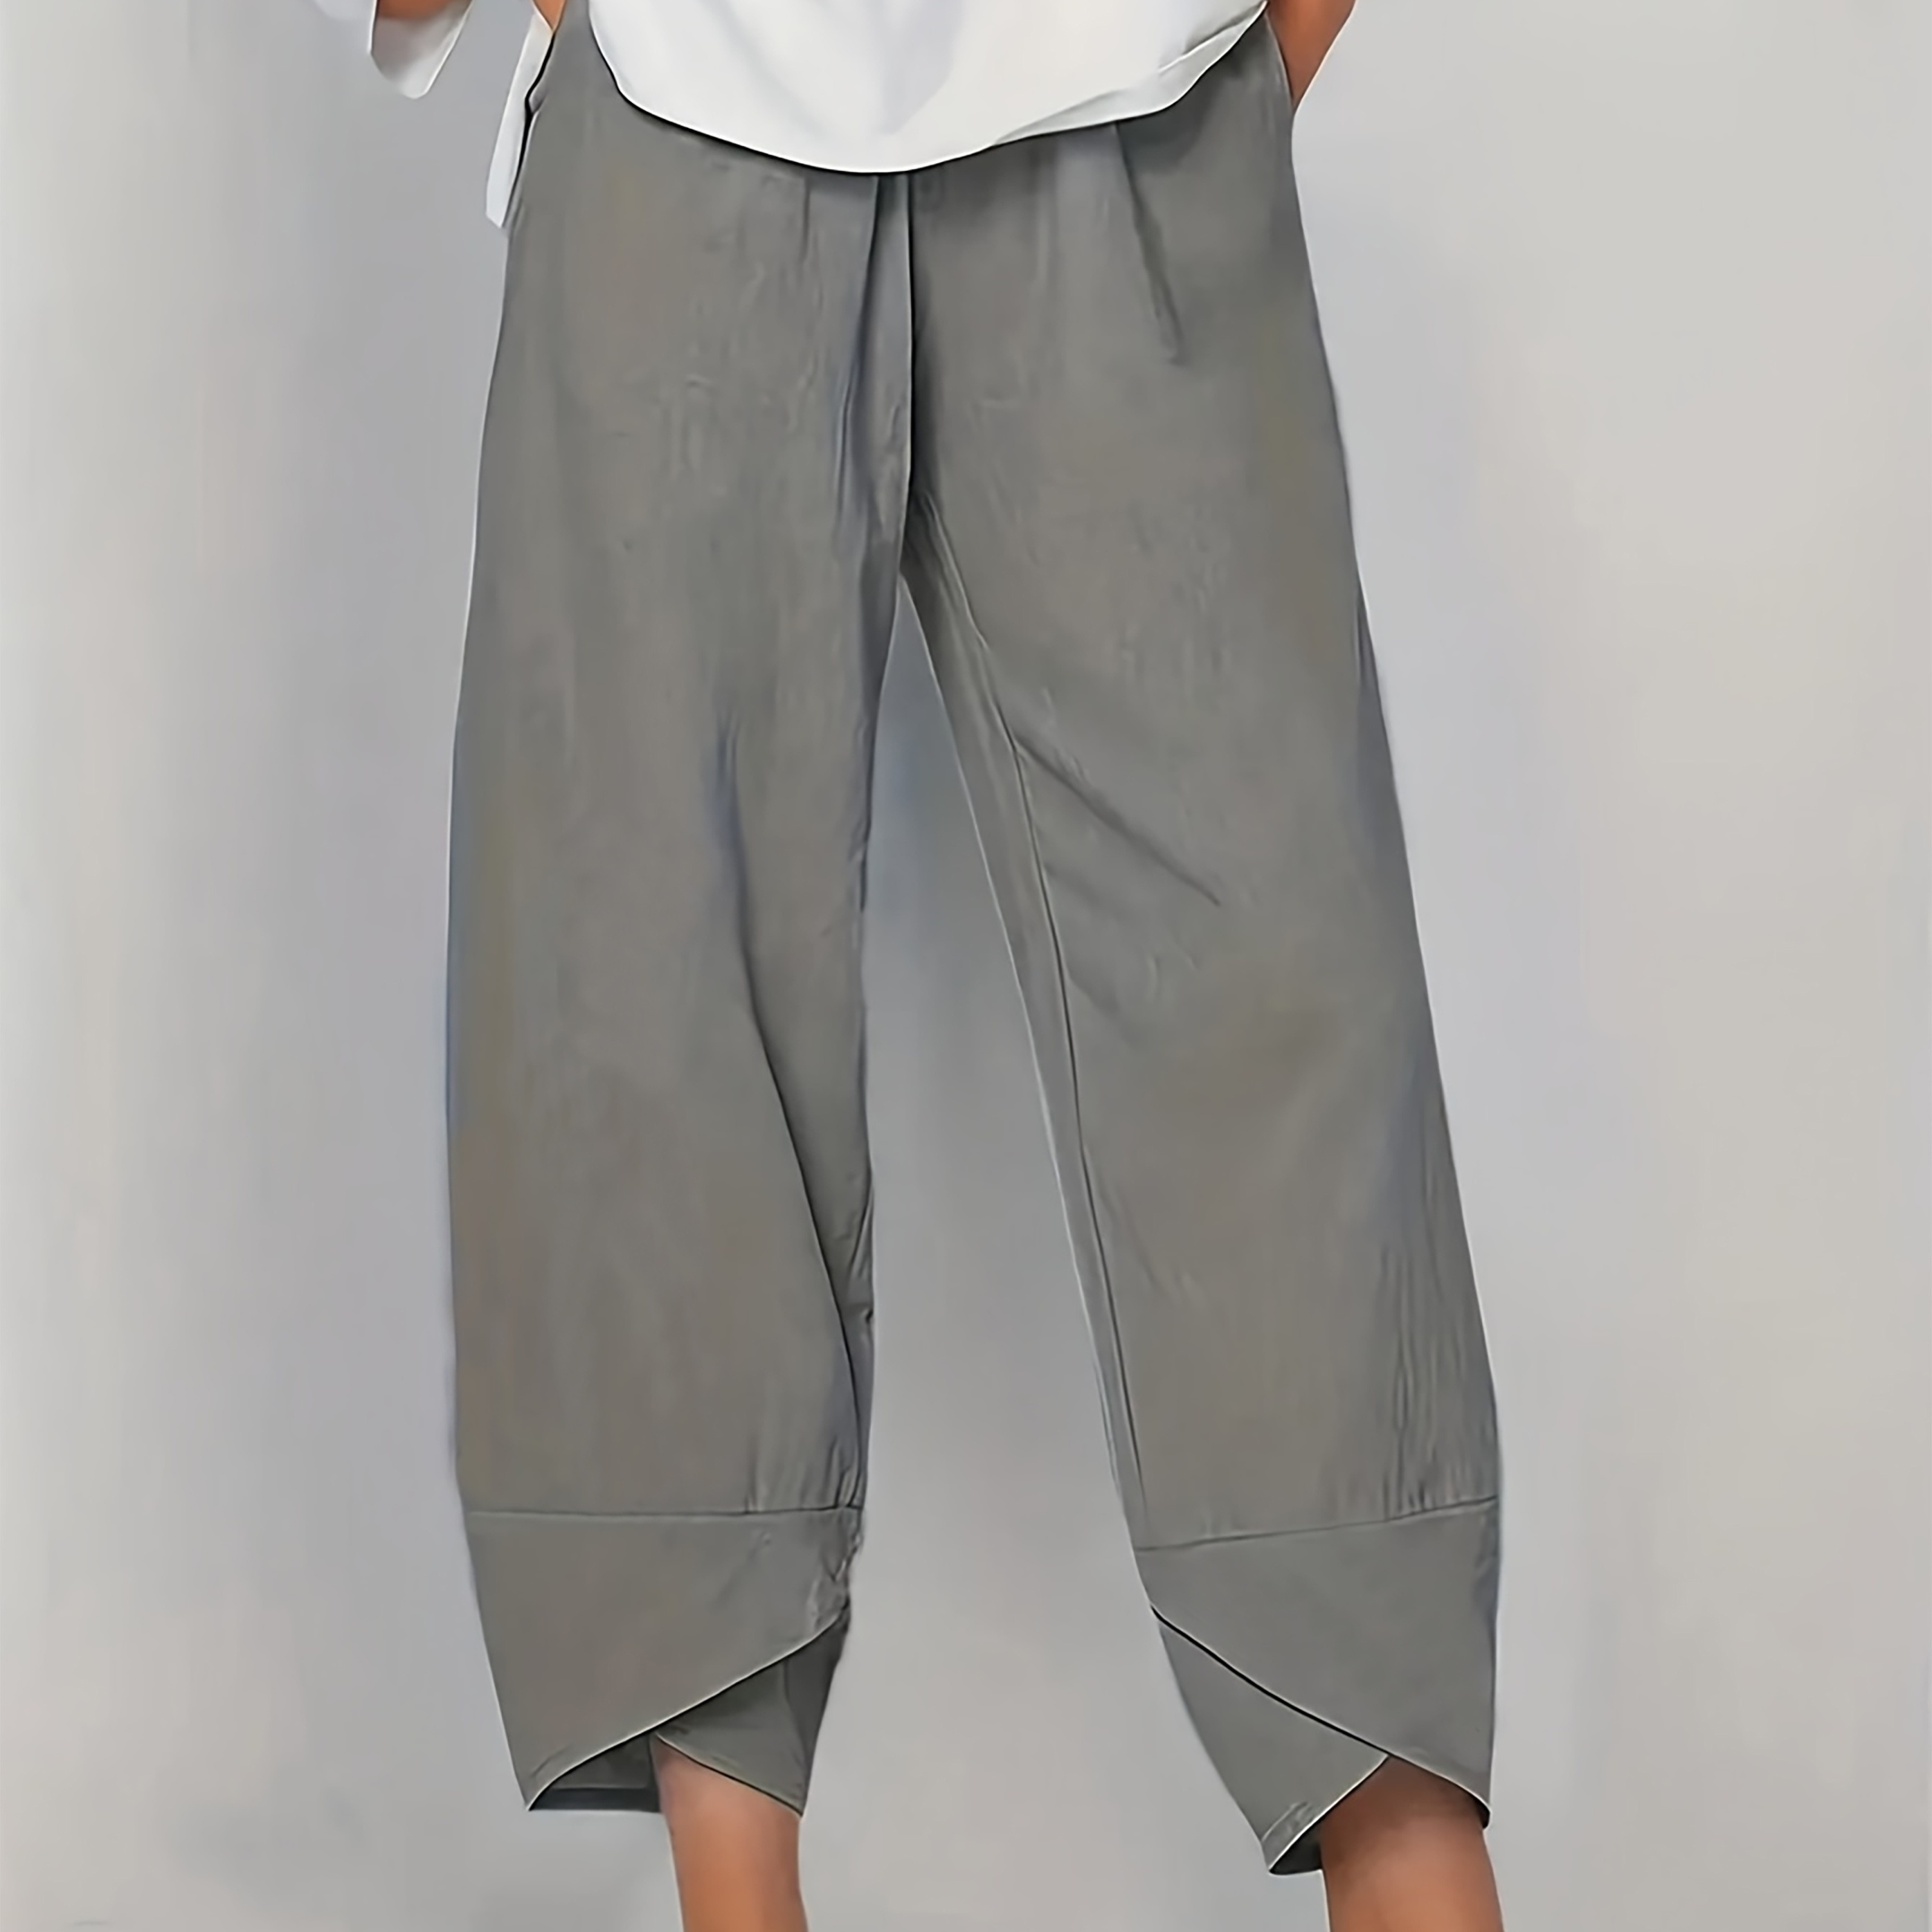 

Plus Size Solid Pocket Baggy Pants, Casual Elastic Waist Pants For Spring & Summer, Women's Plus Size Clothing